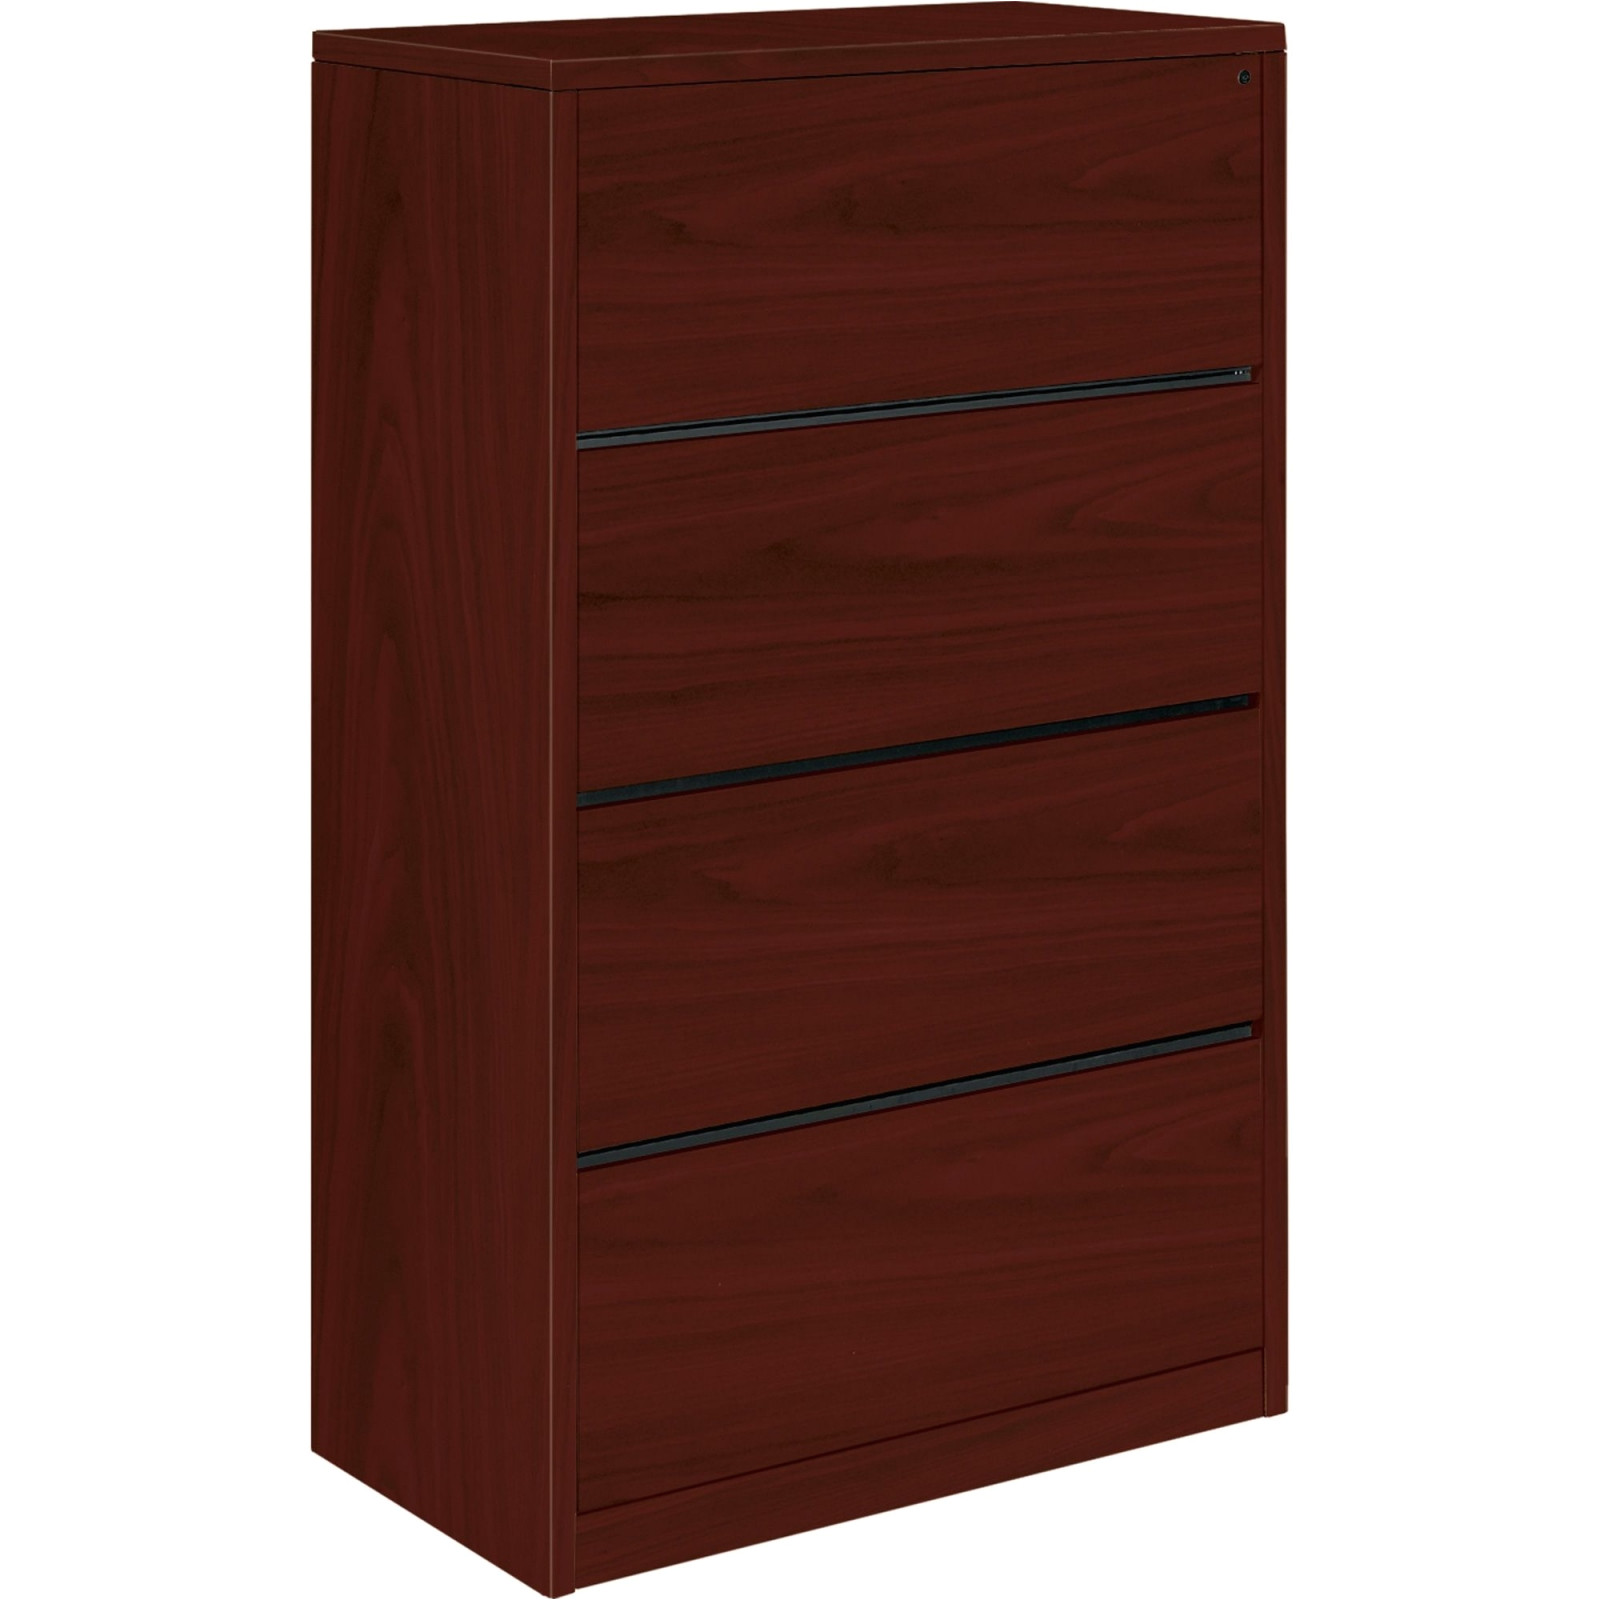 image of mahogany lateral file cabinet 4 drawer